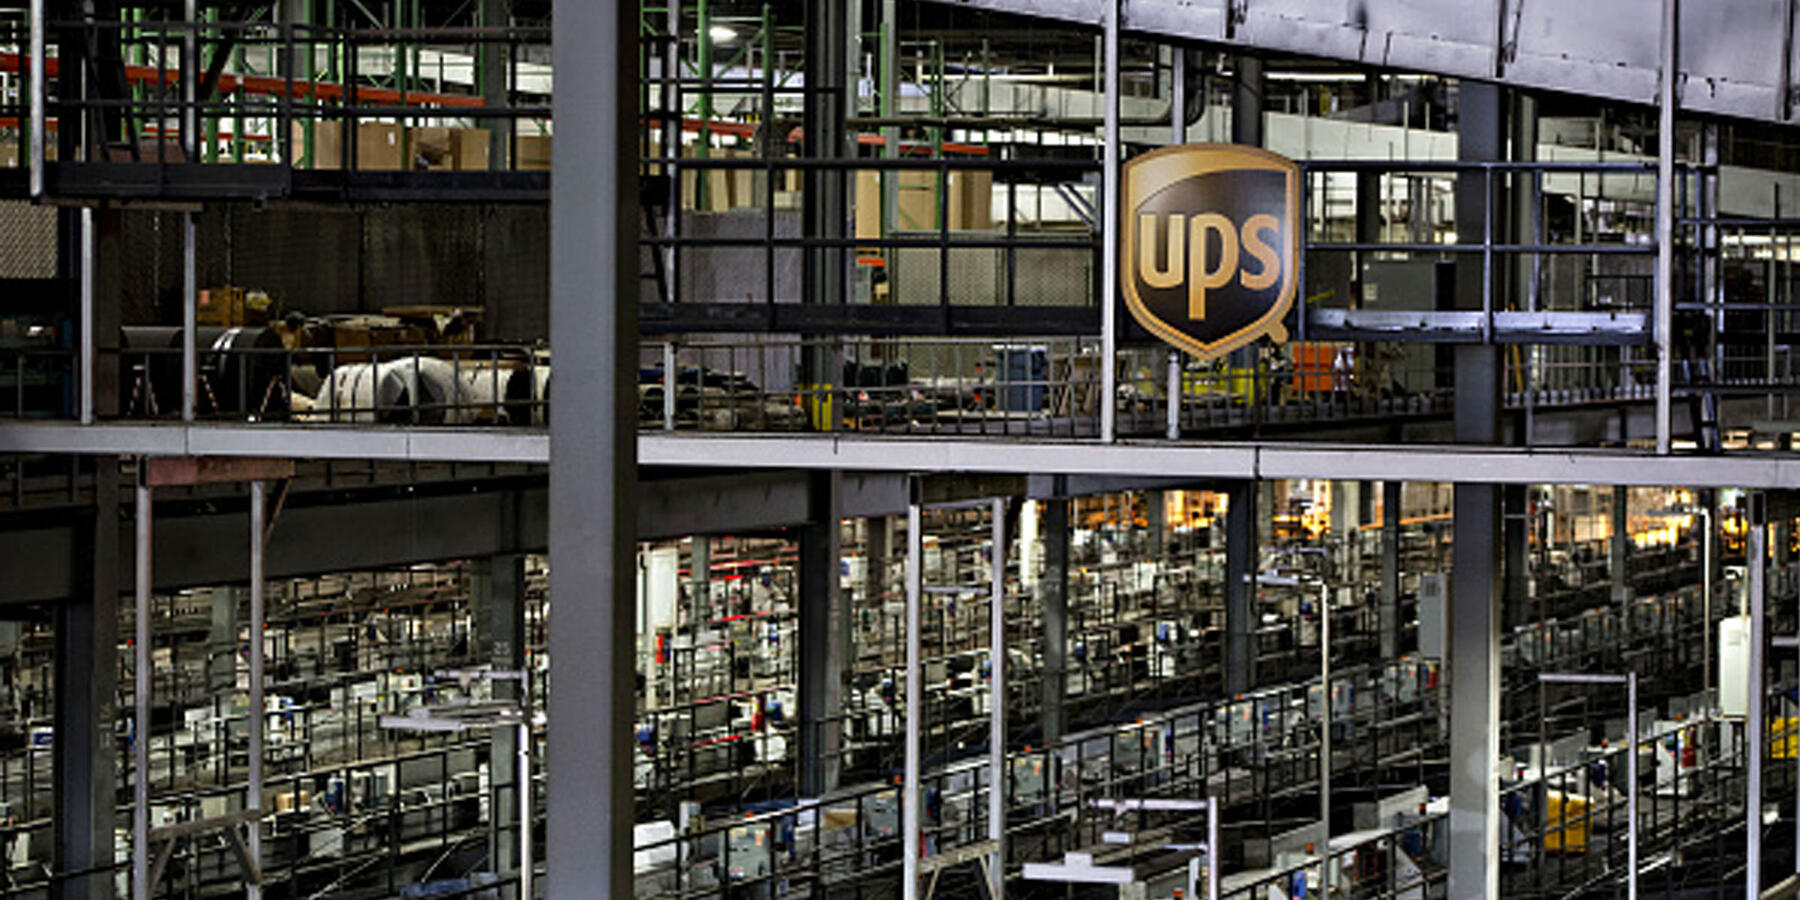 Industrial Construction Services - UPS Chicago Hub interior with UPS sign